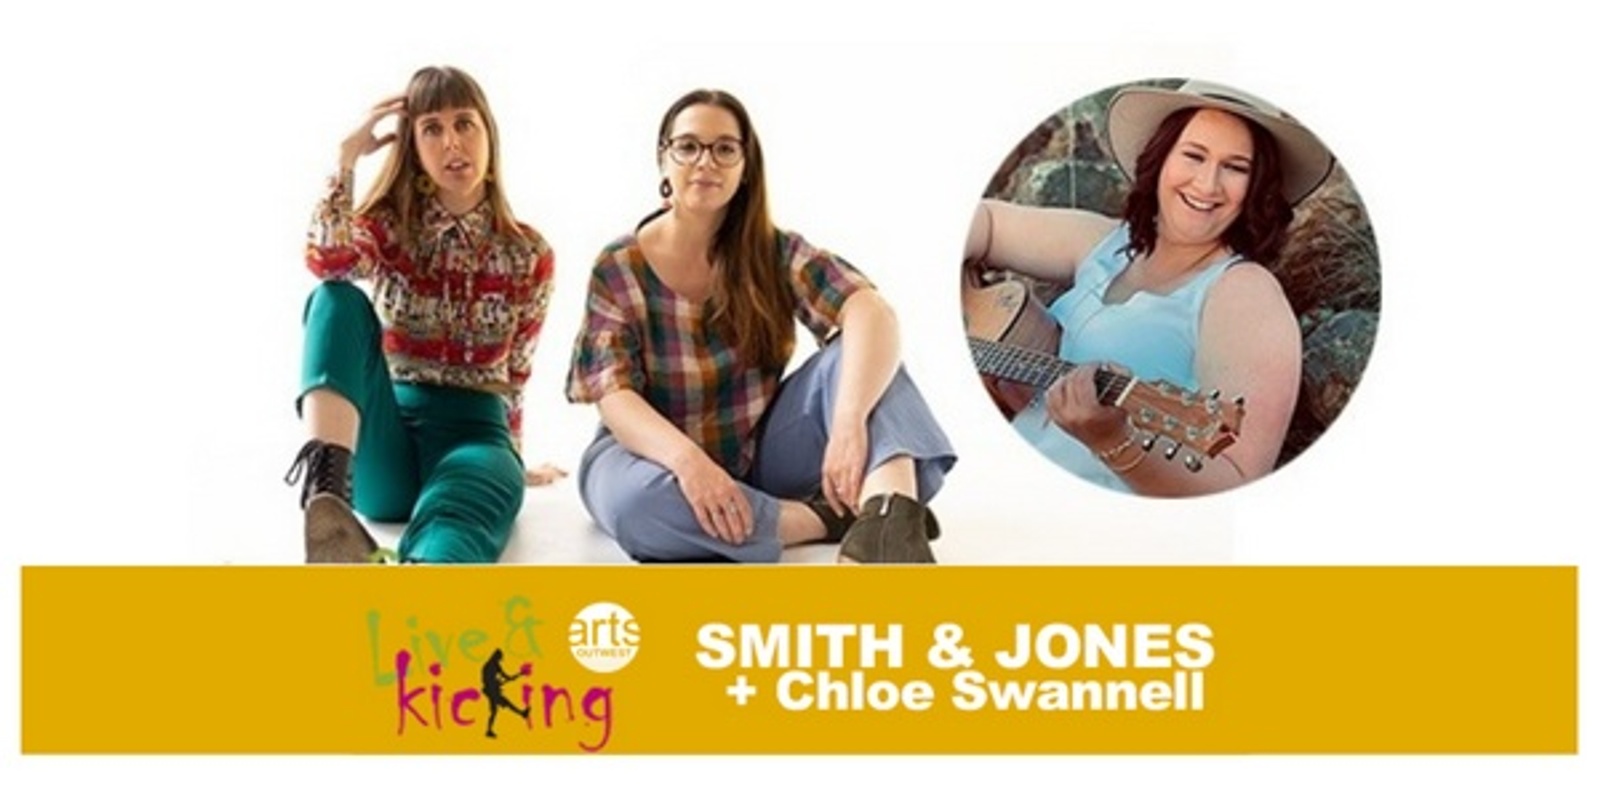 Banner image for Live & Kicking - Smith and Jones with Chloe Swannell